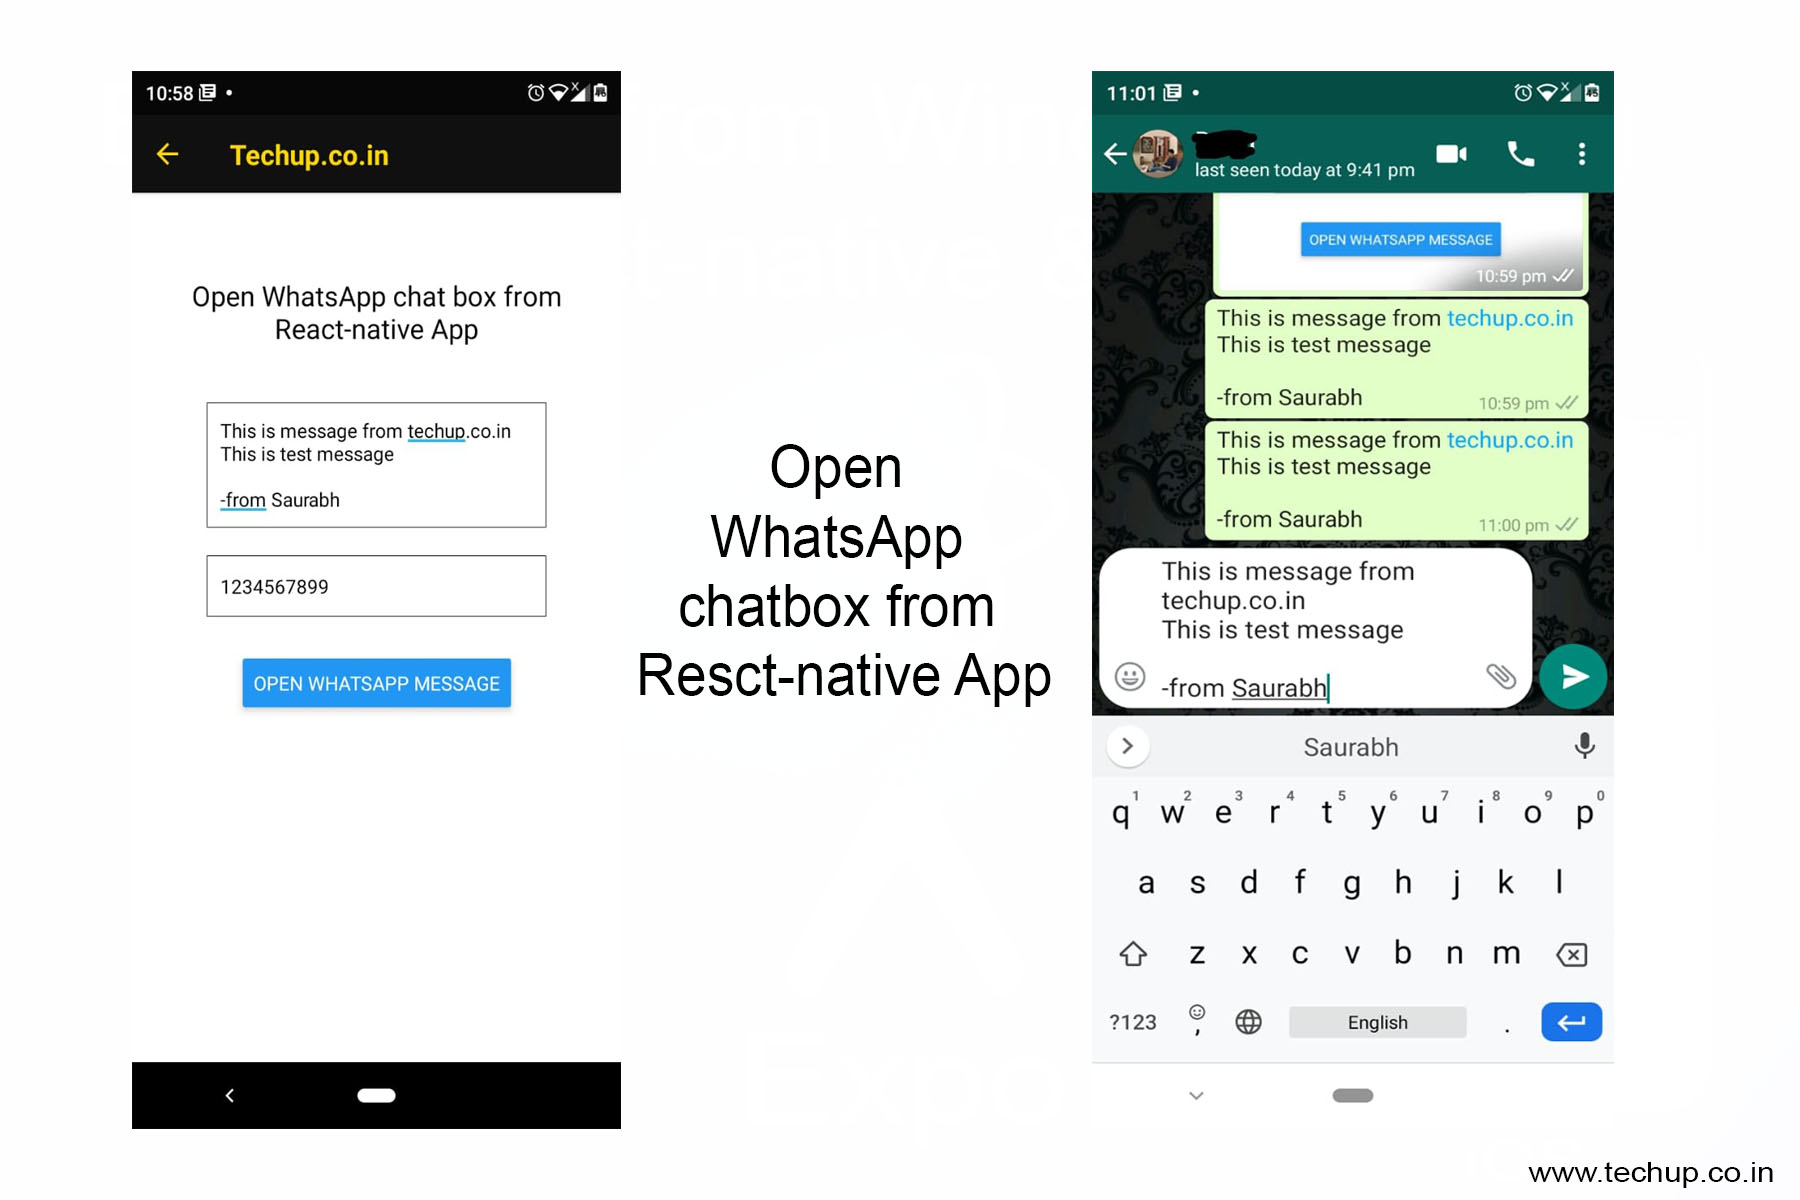 Open WhatsApp chatbox from React-native